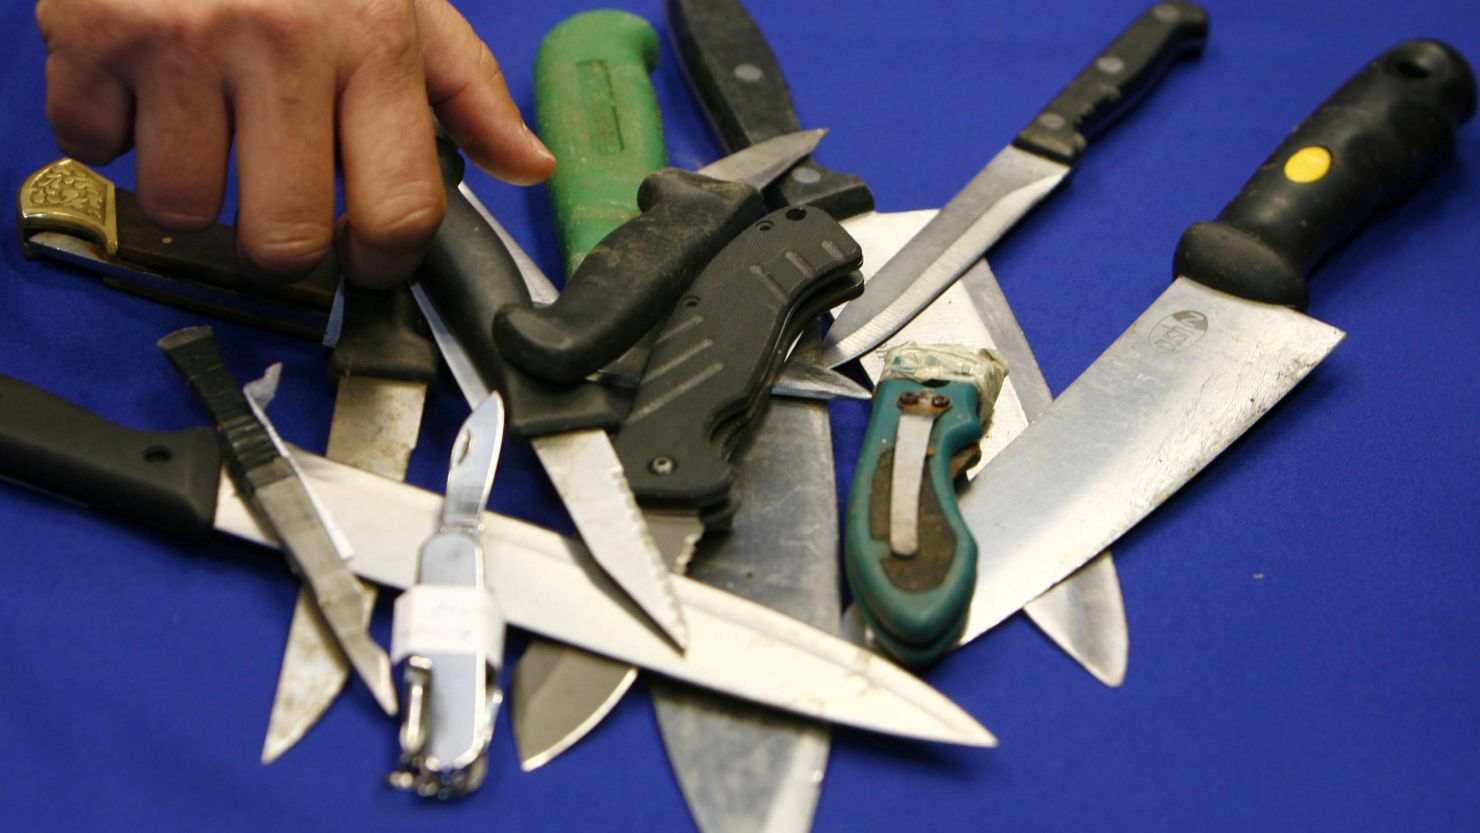 Knives seized by police in London, where stabbings are on the rise.